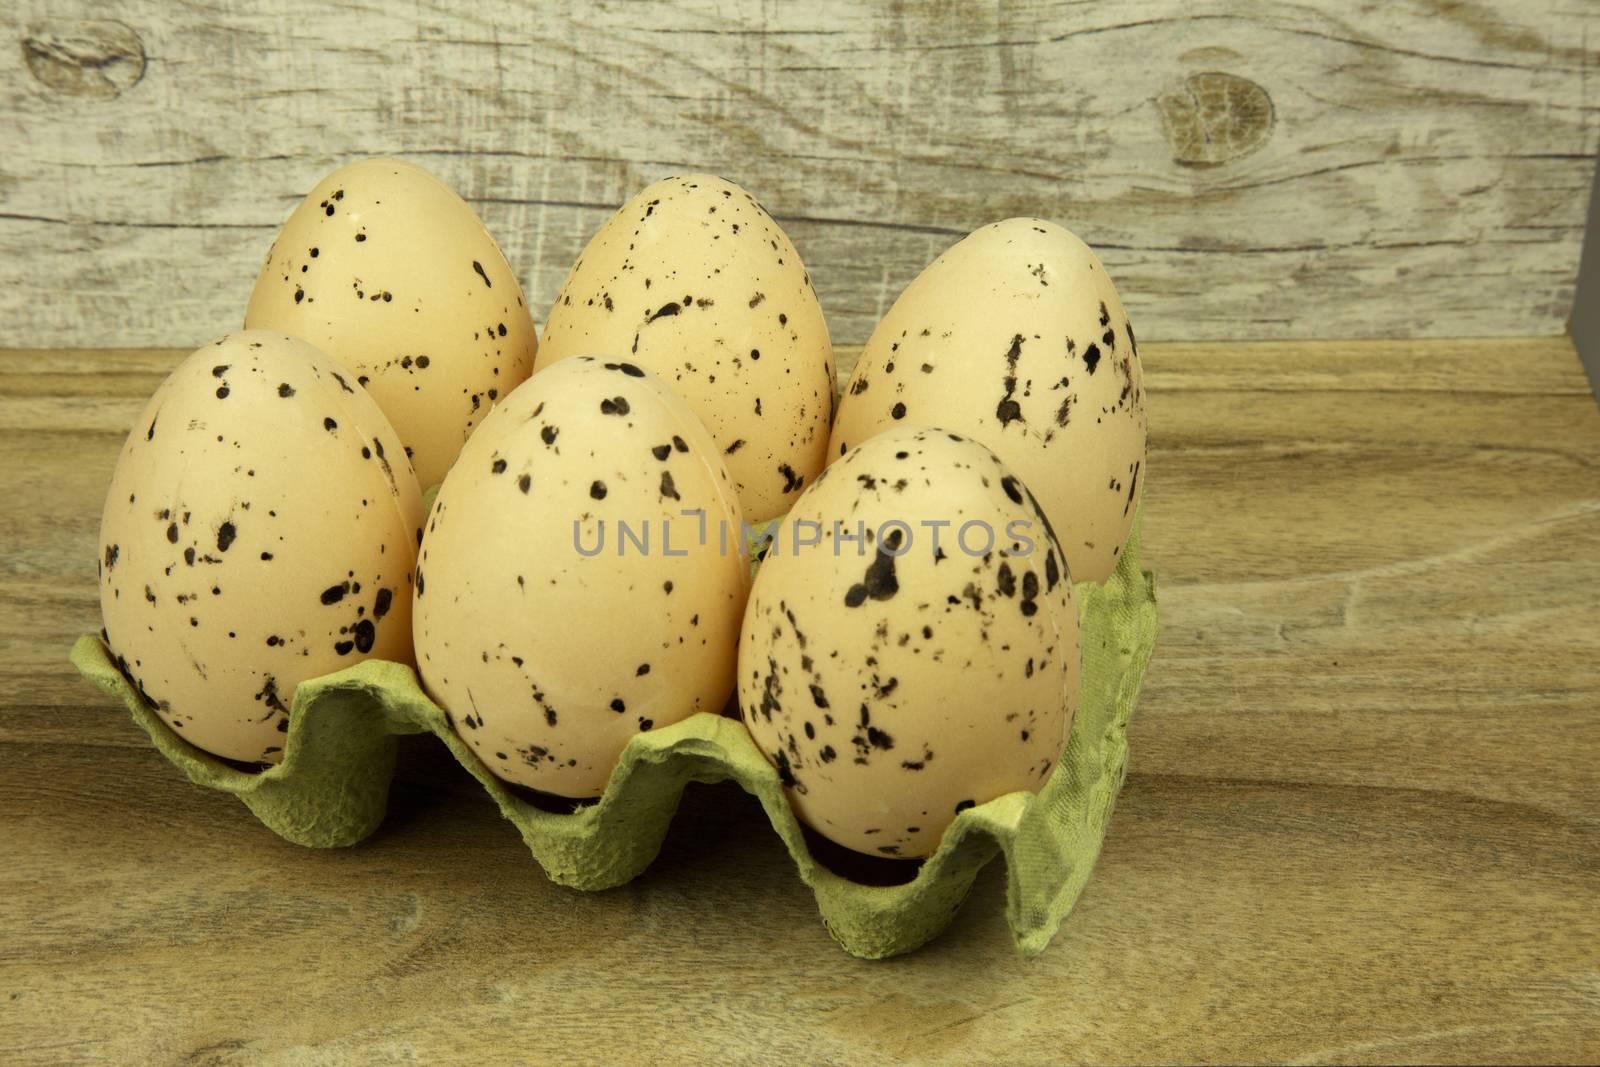 Six large white eggs with black spots in the mold. Easter decoration on the wooden background. Horizontal view.